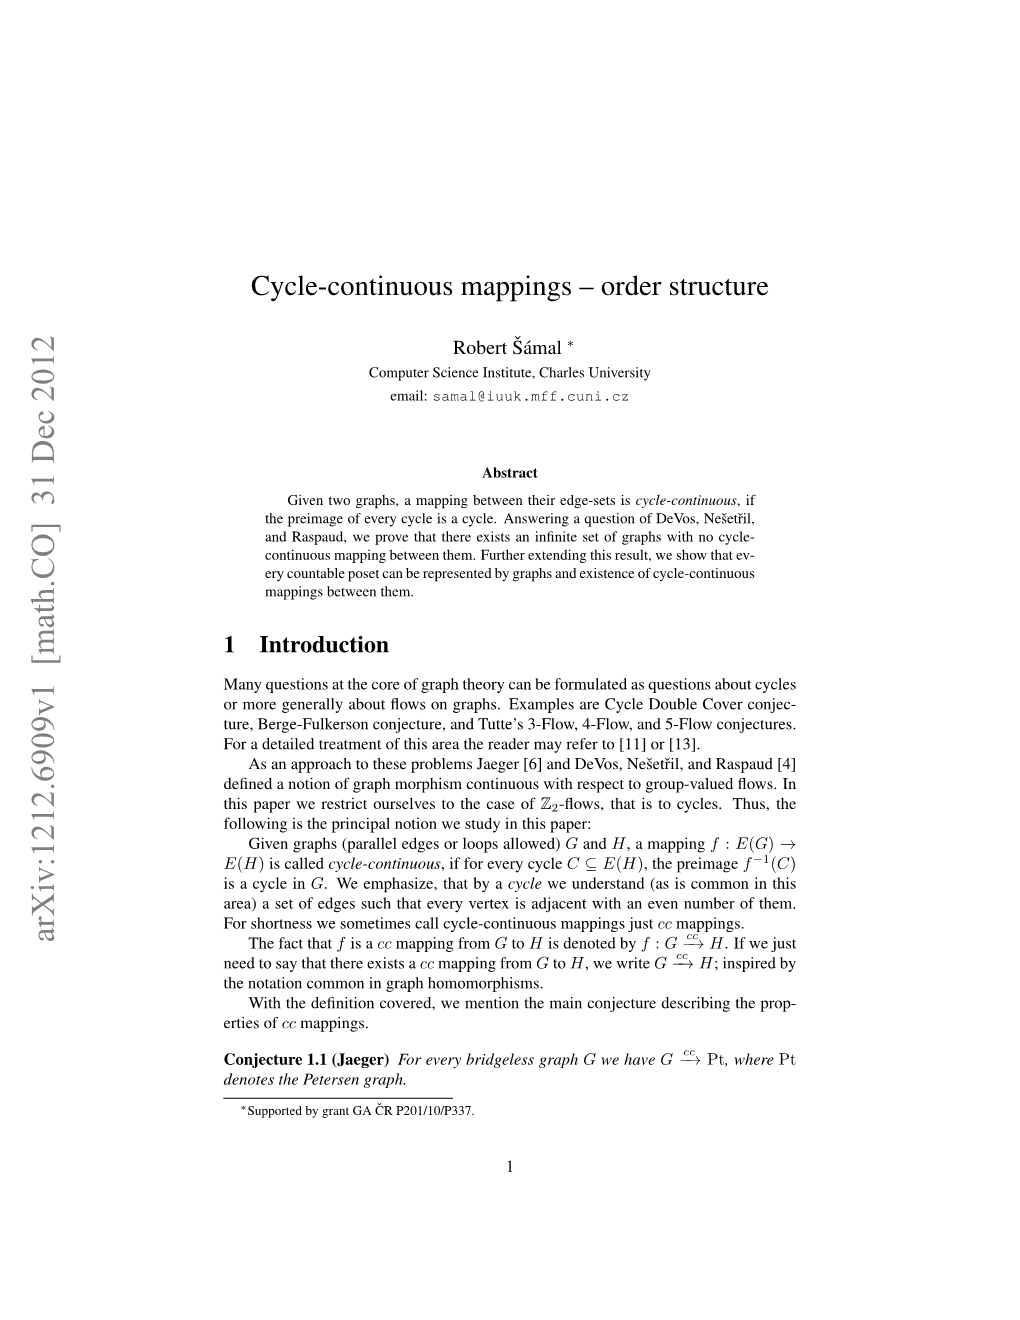 Cycle-Continuous Mappings--Order Structure